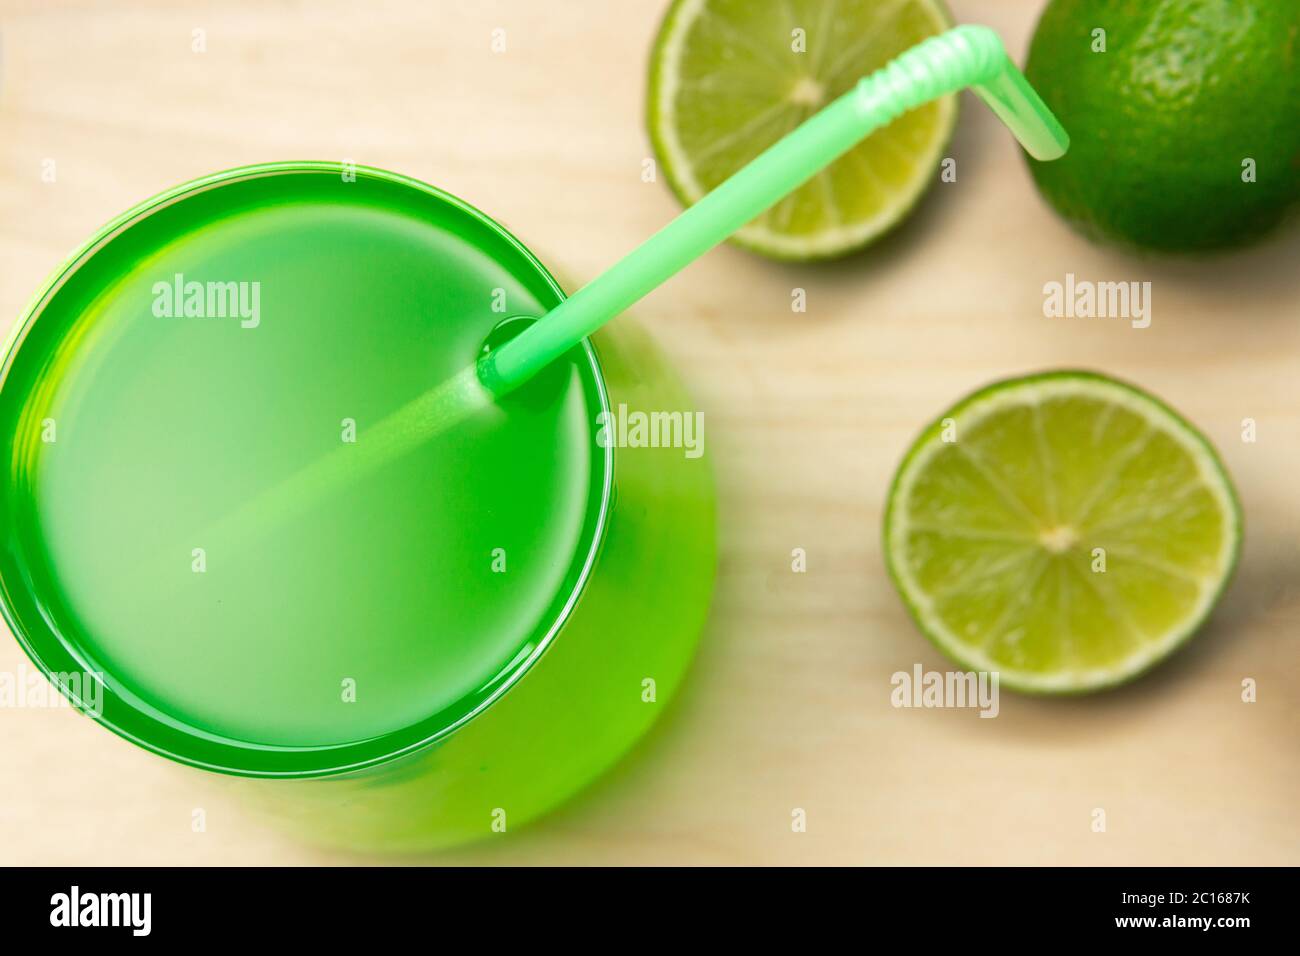 limes juice, lemonade in a glass glass. Healthy lifestyle and detox conceptual background, selective focus Stock Photo